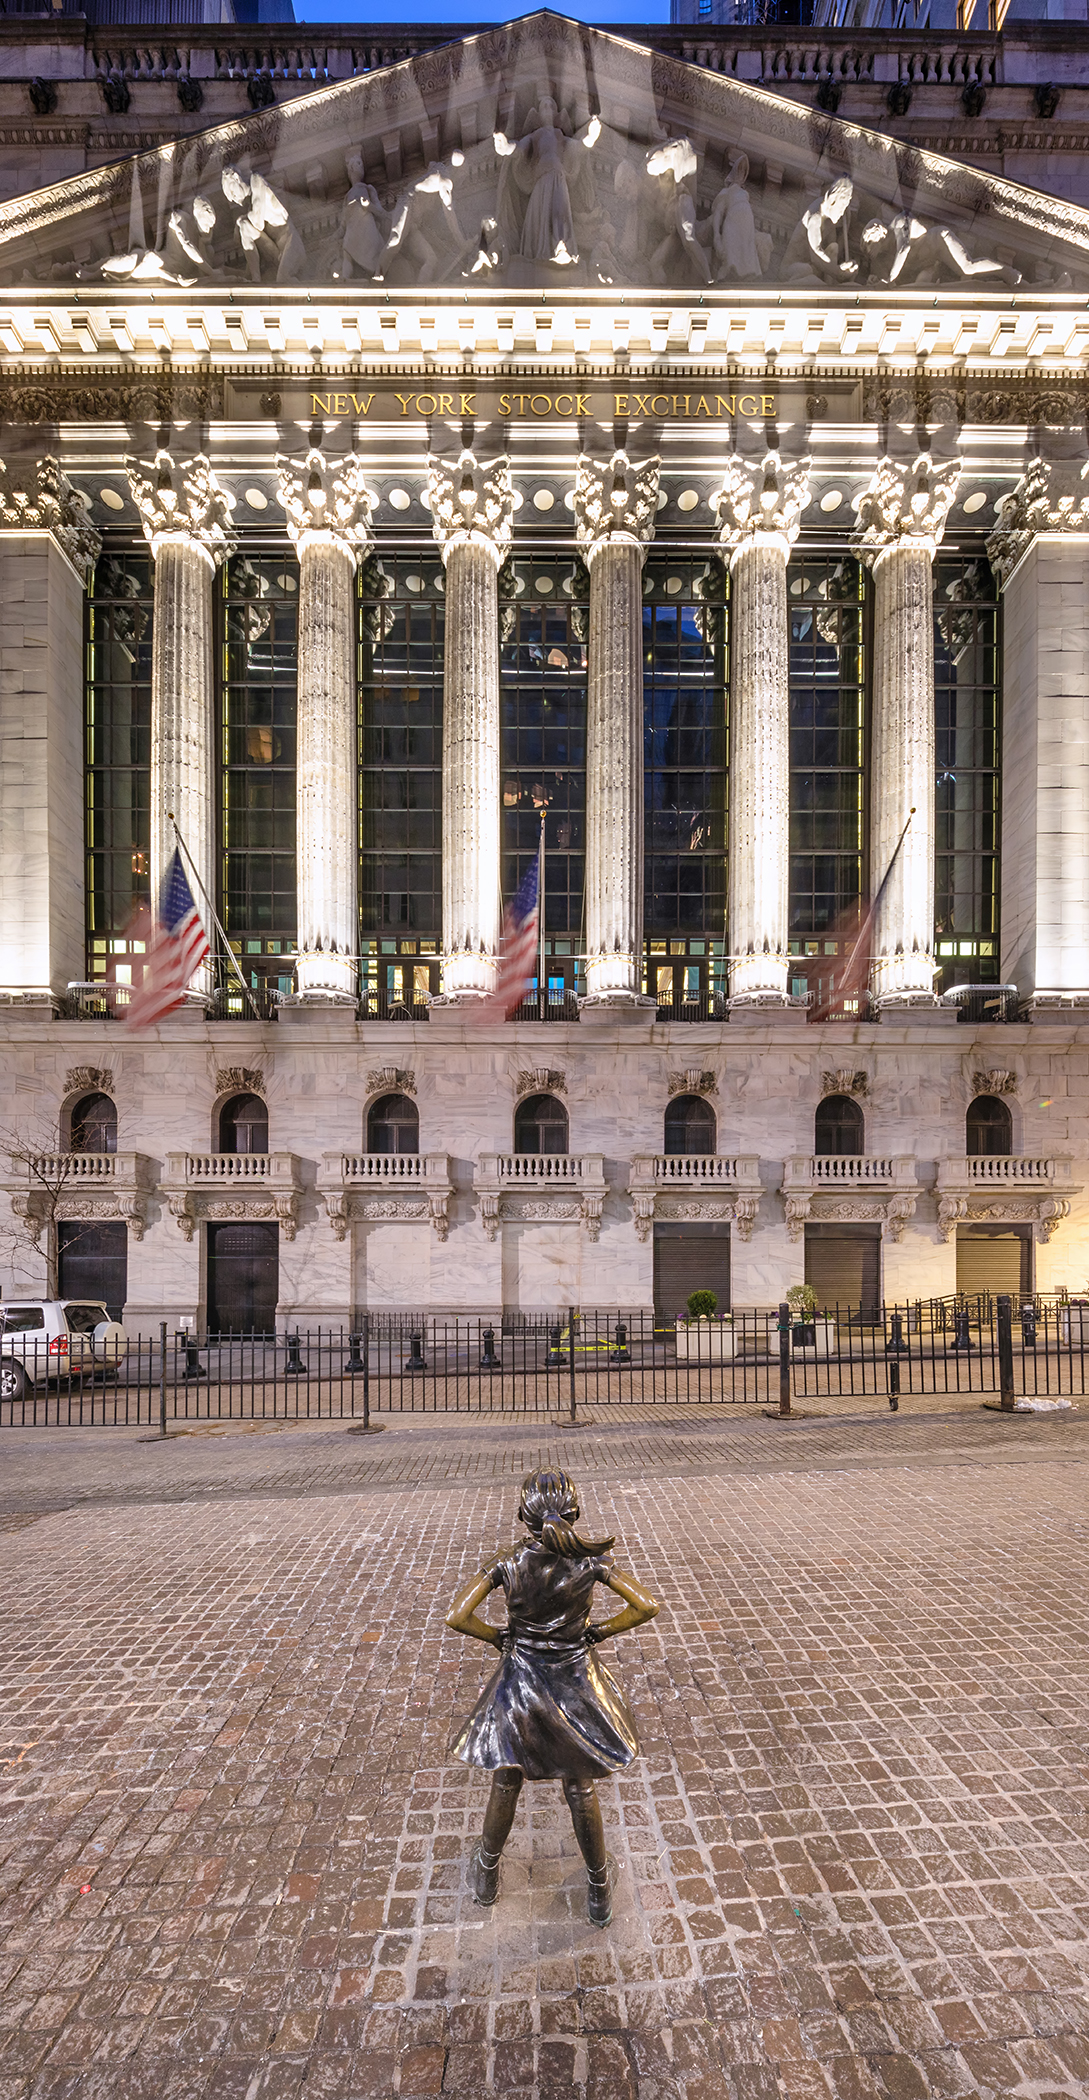 The New York Stock Exchange with Fearless Girl standing in front, in Manhattan's Financial District